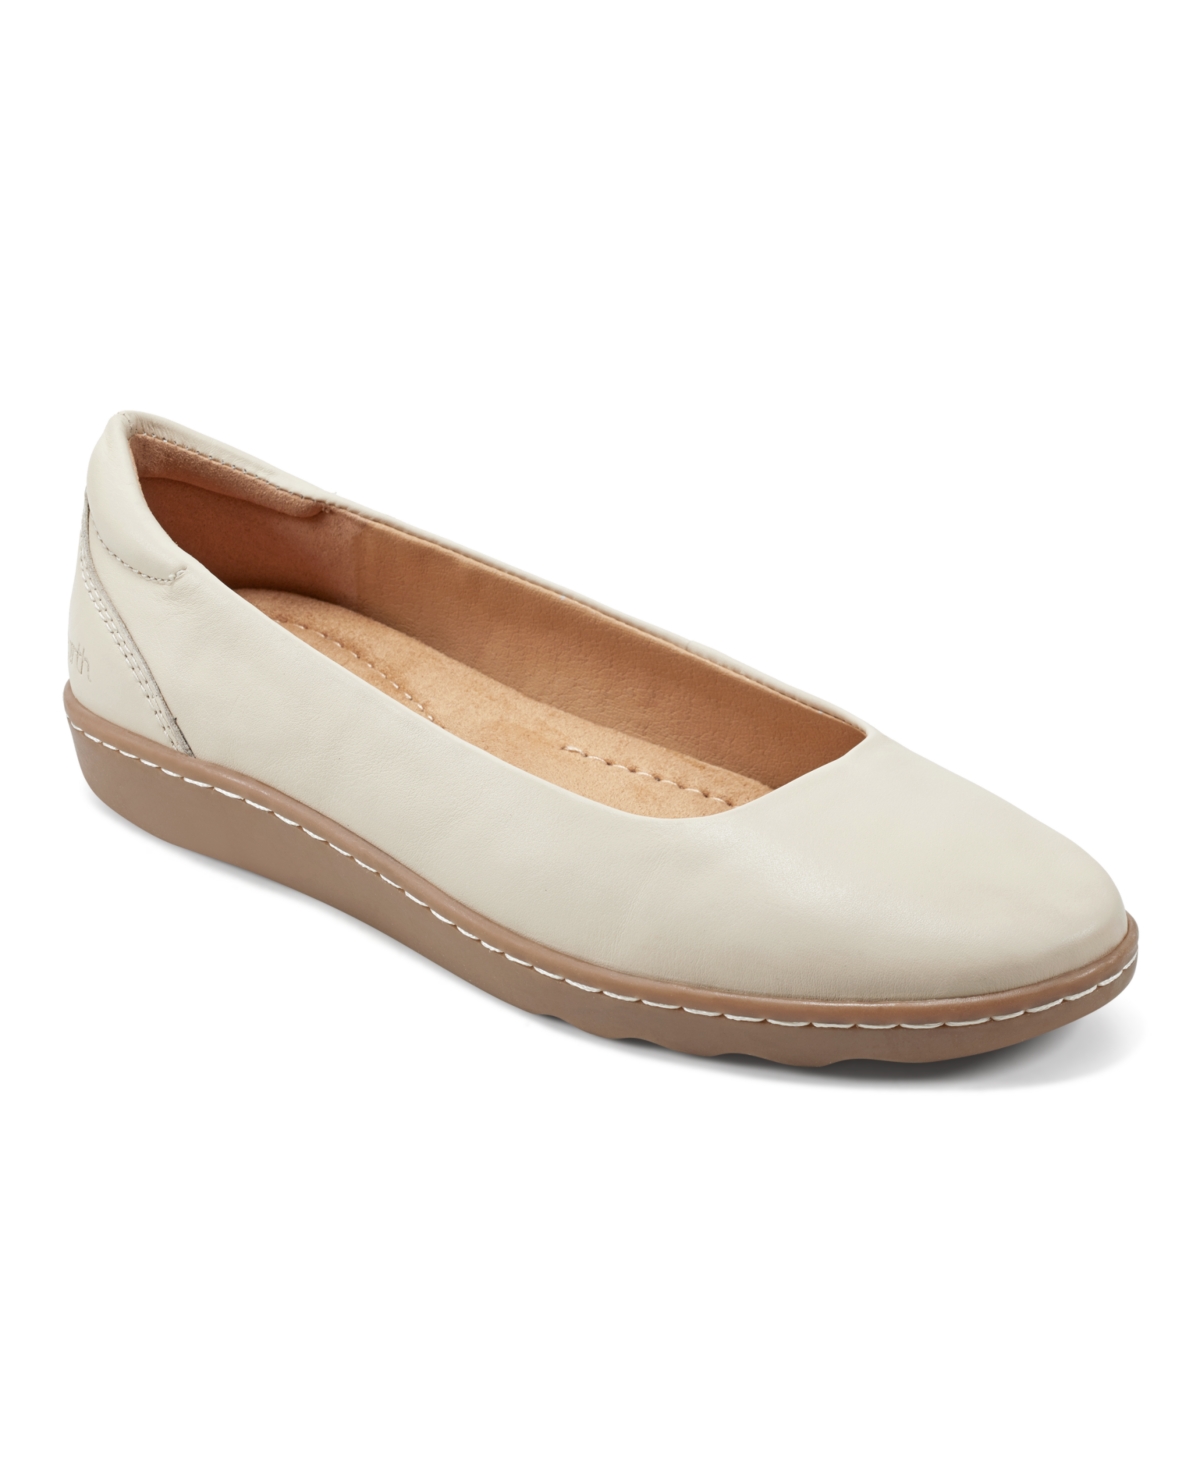 Shop Earth Women's Landen Slip-on Round Toe Casual Ballet Flats In Cream Leather